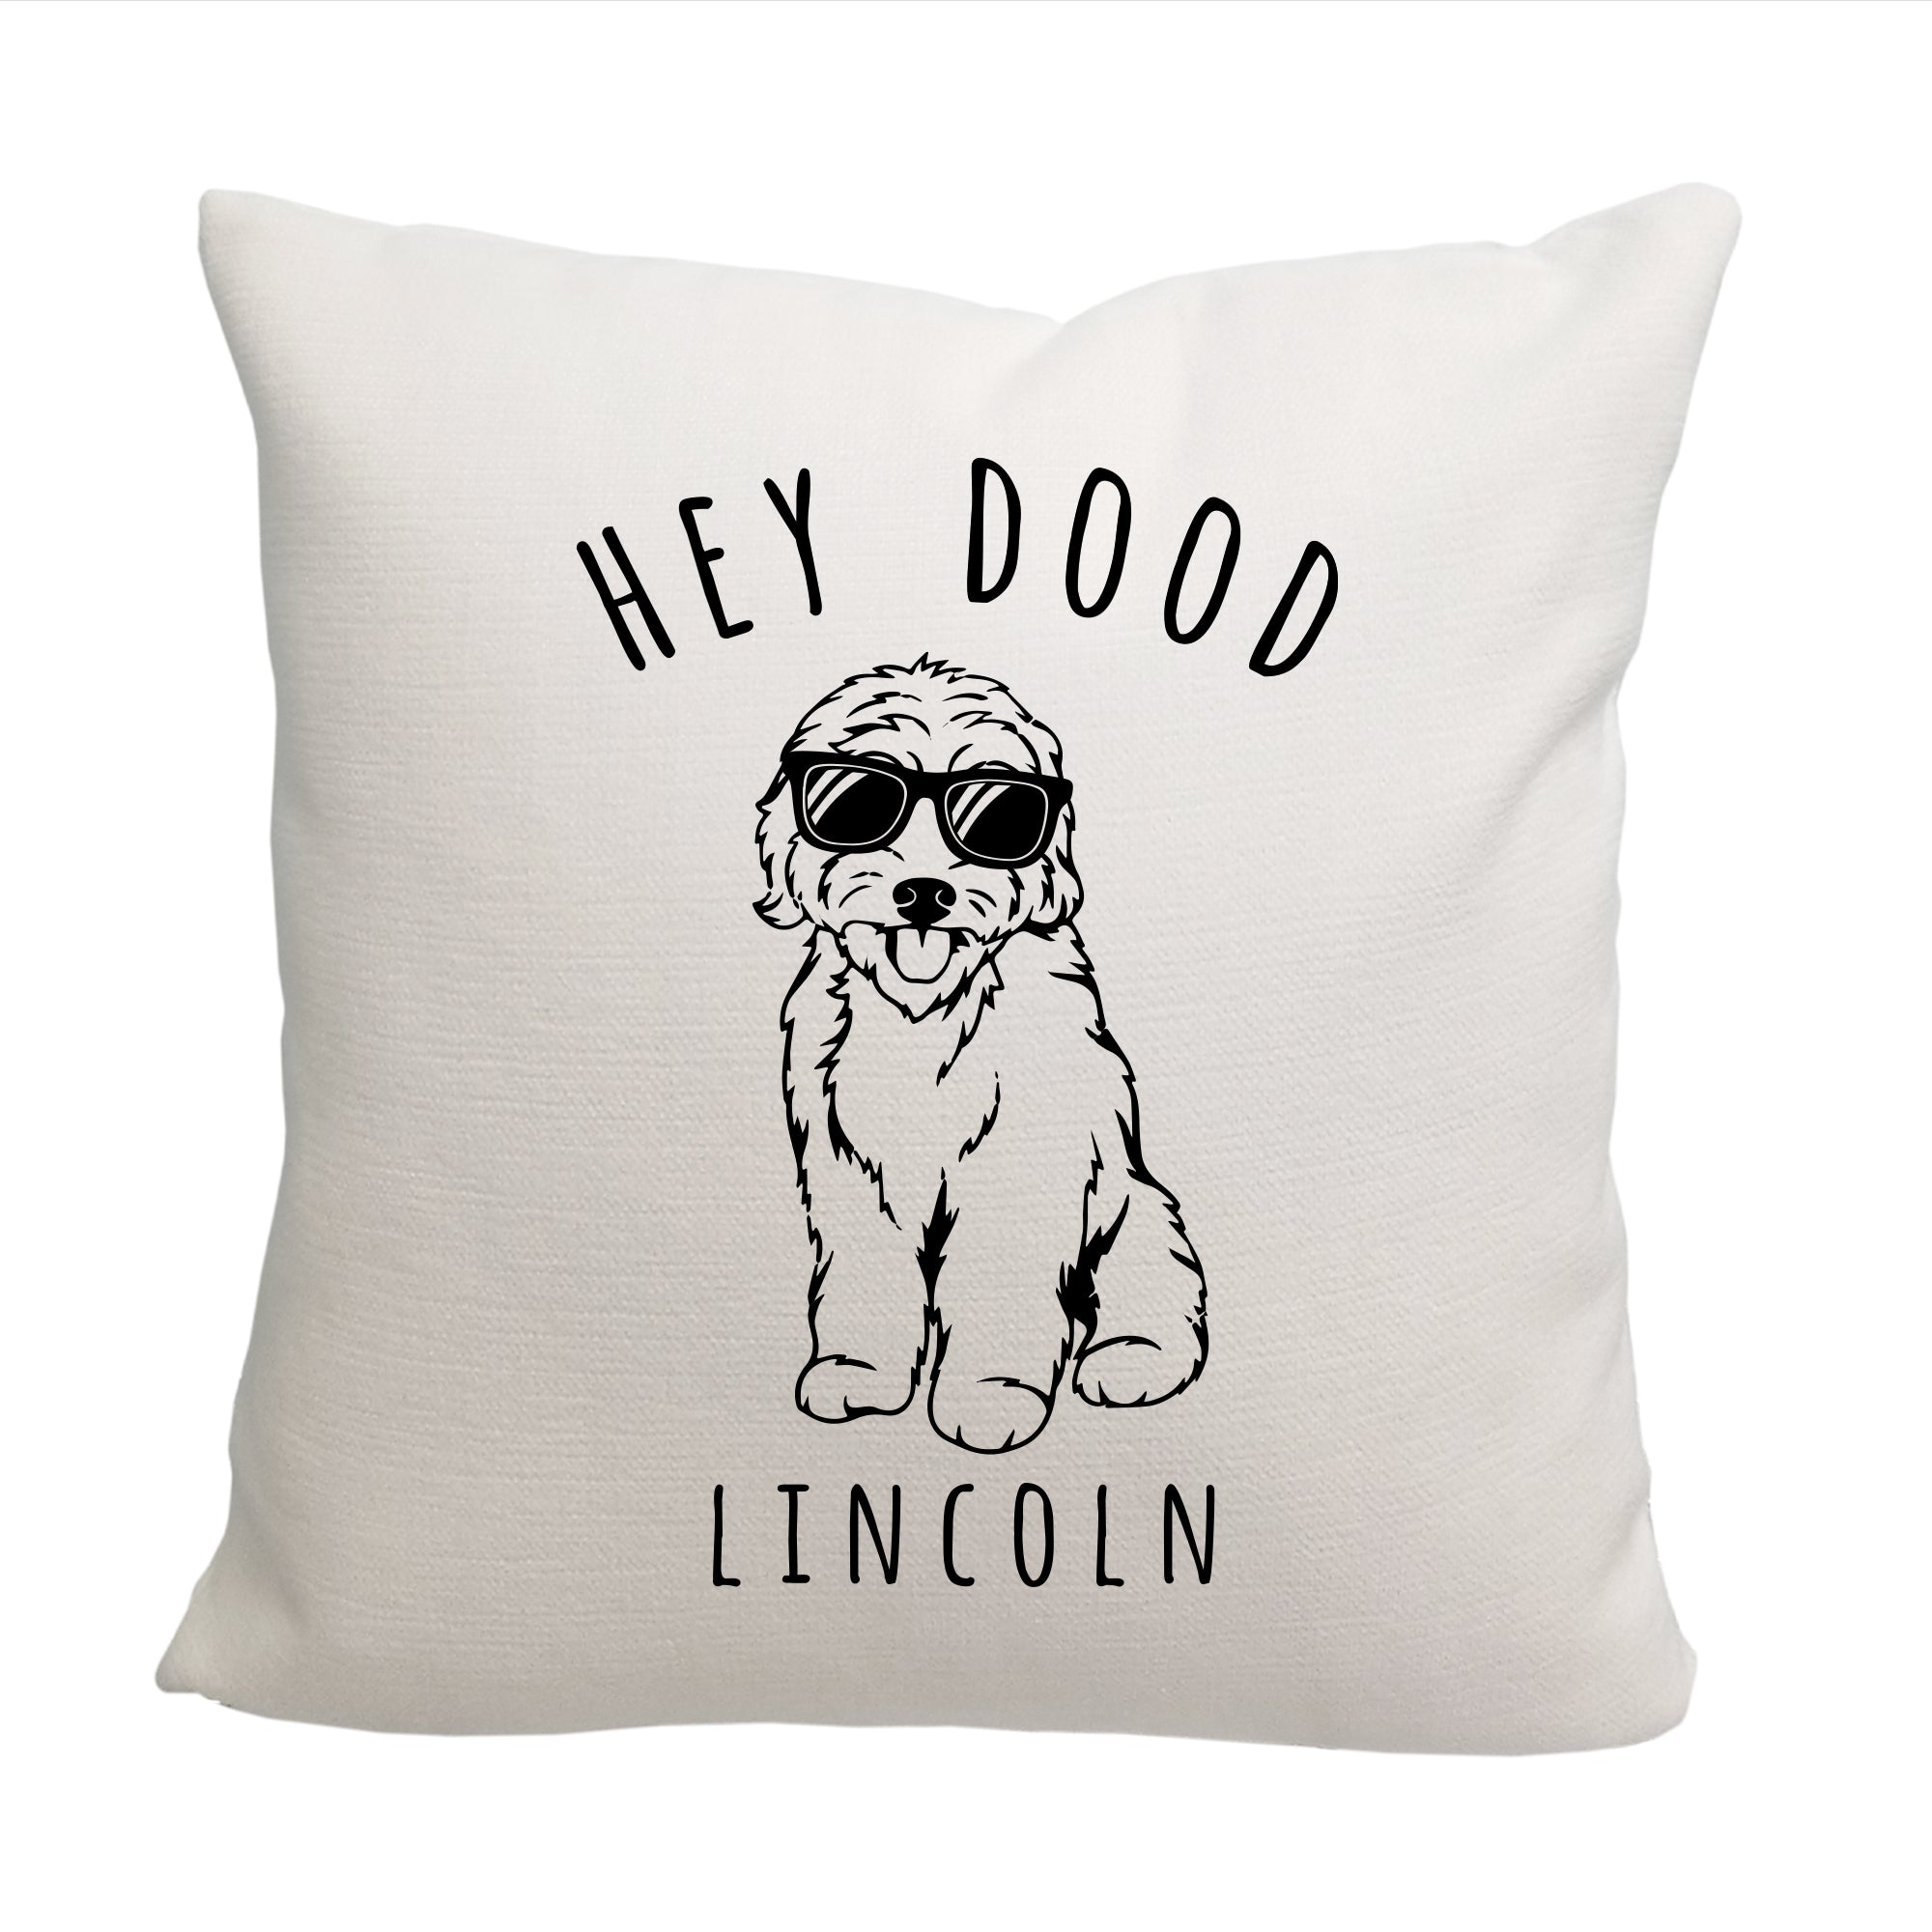 Doodle Dood Throw Pillow - Cover Only OR Cover with Insert